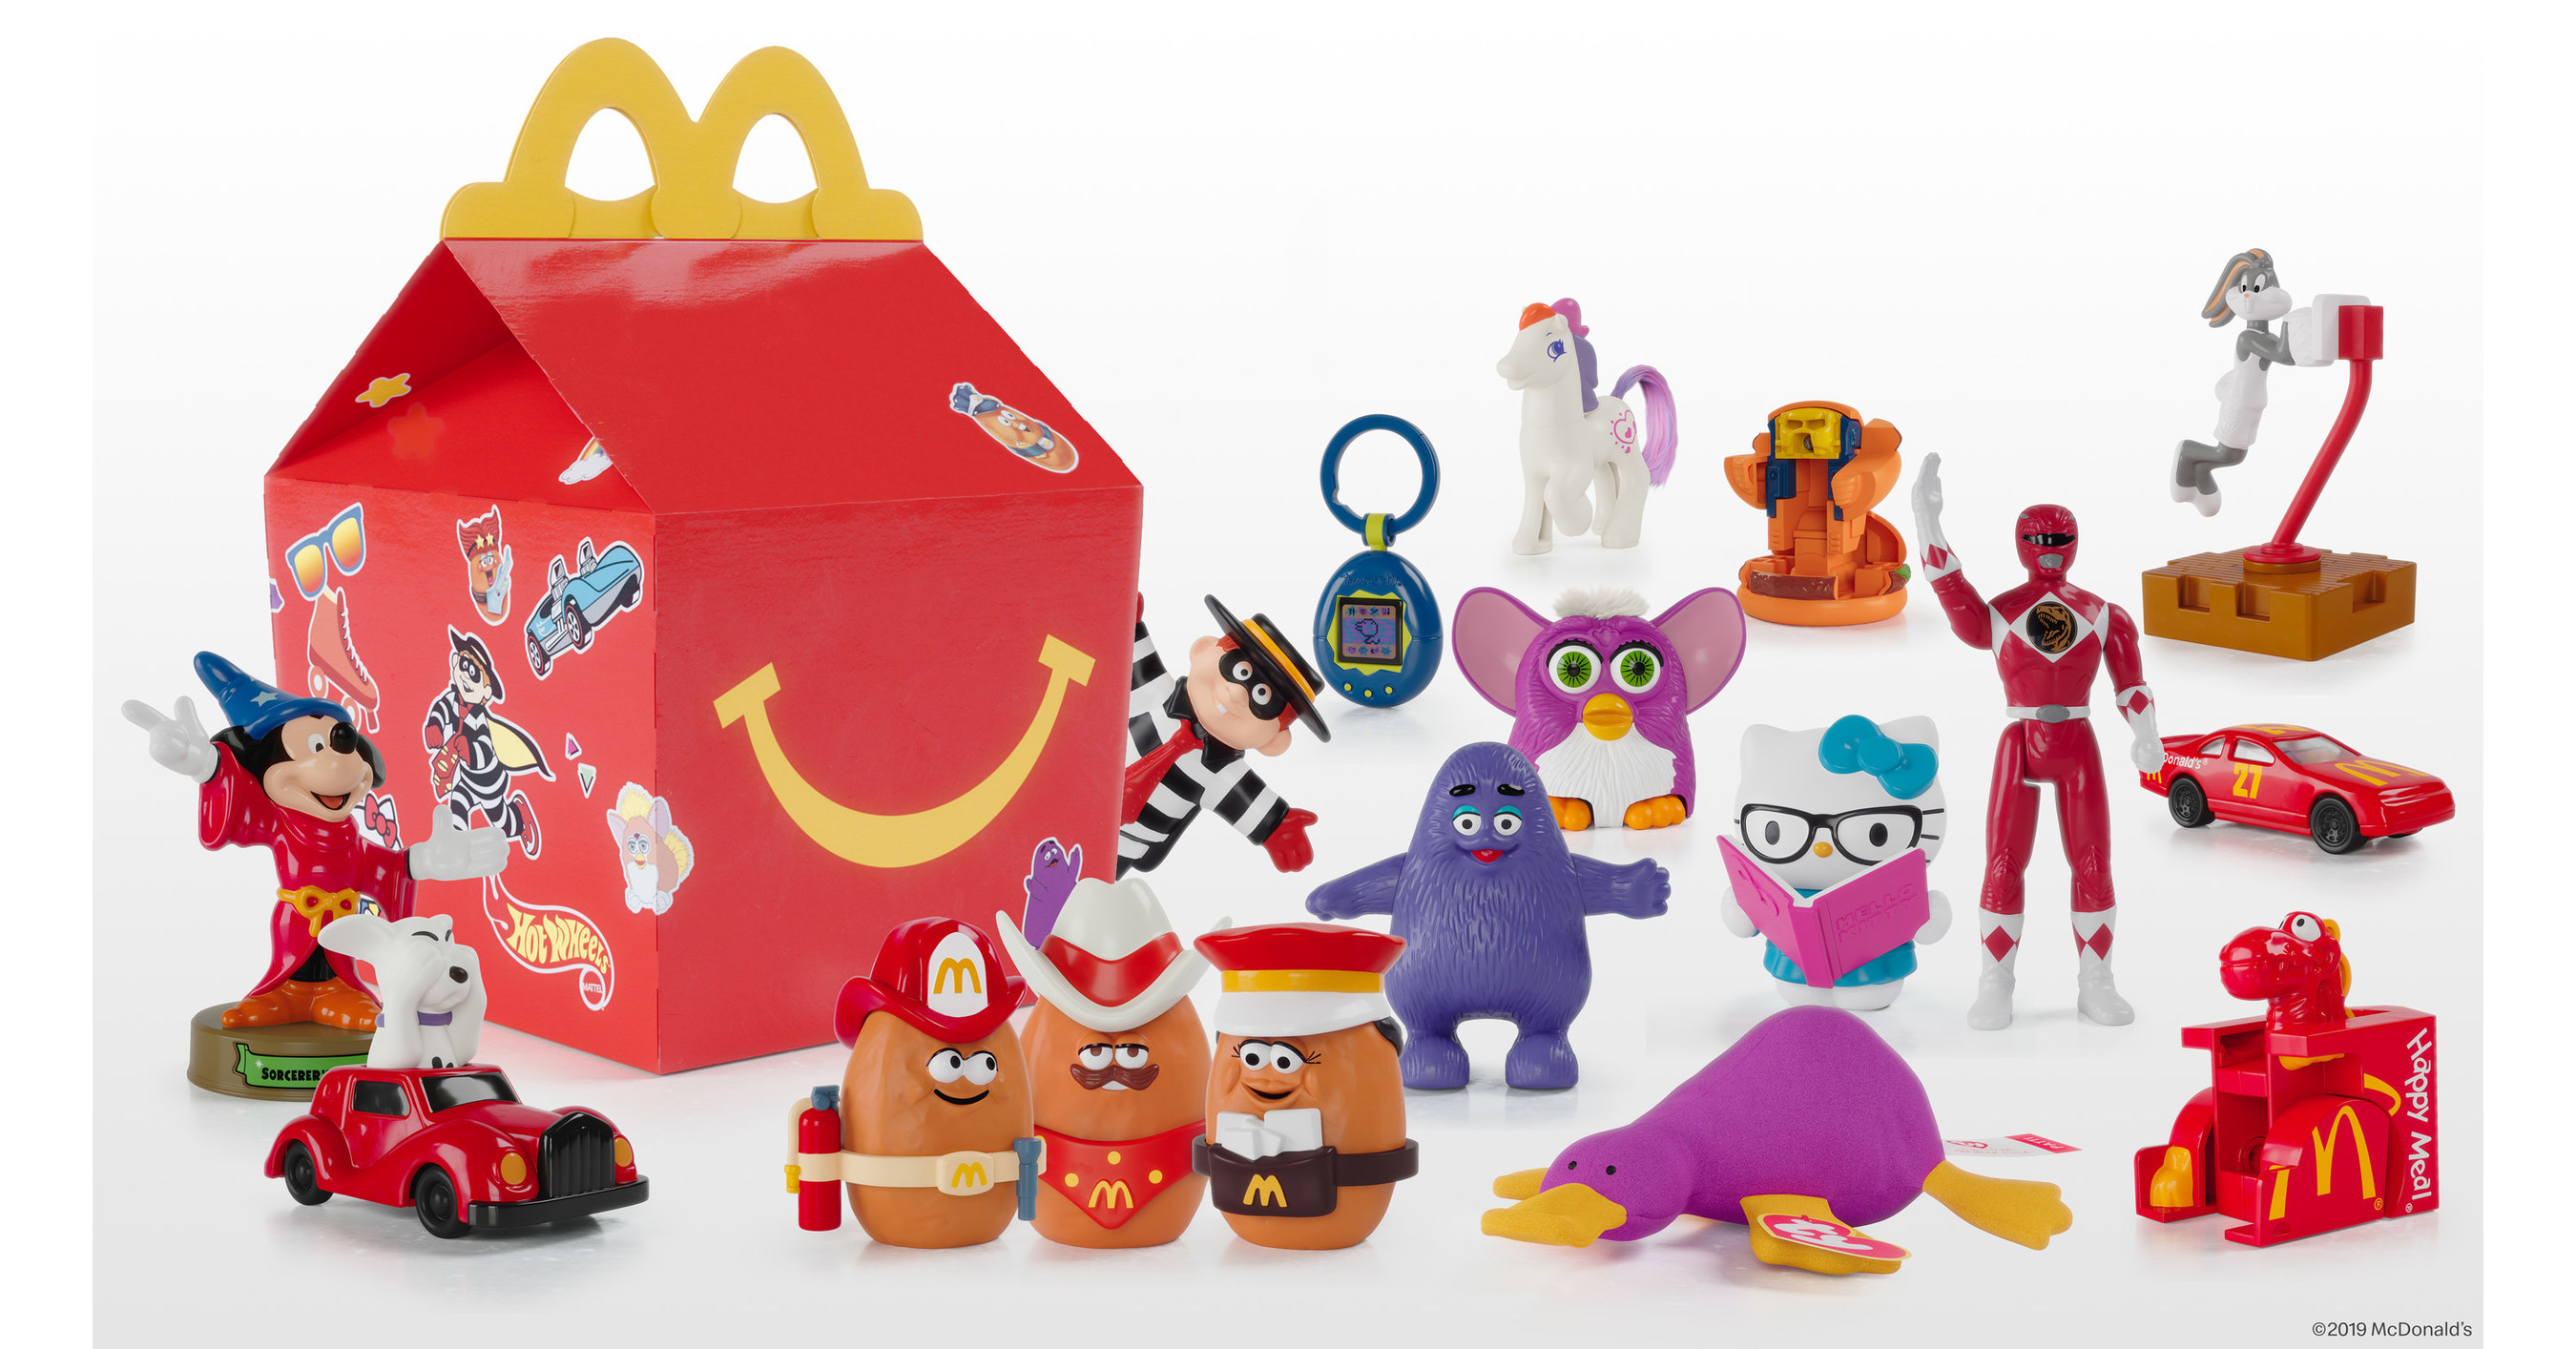 They Re Back Mcdonald S Introduces The Limited Edition Surprise Happy Meal Featuring Iconic Throwback Toys From The Past 40 Years